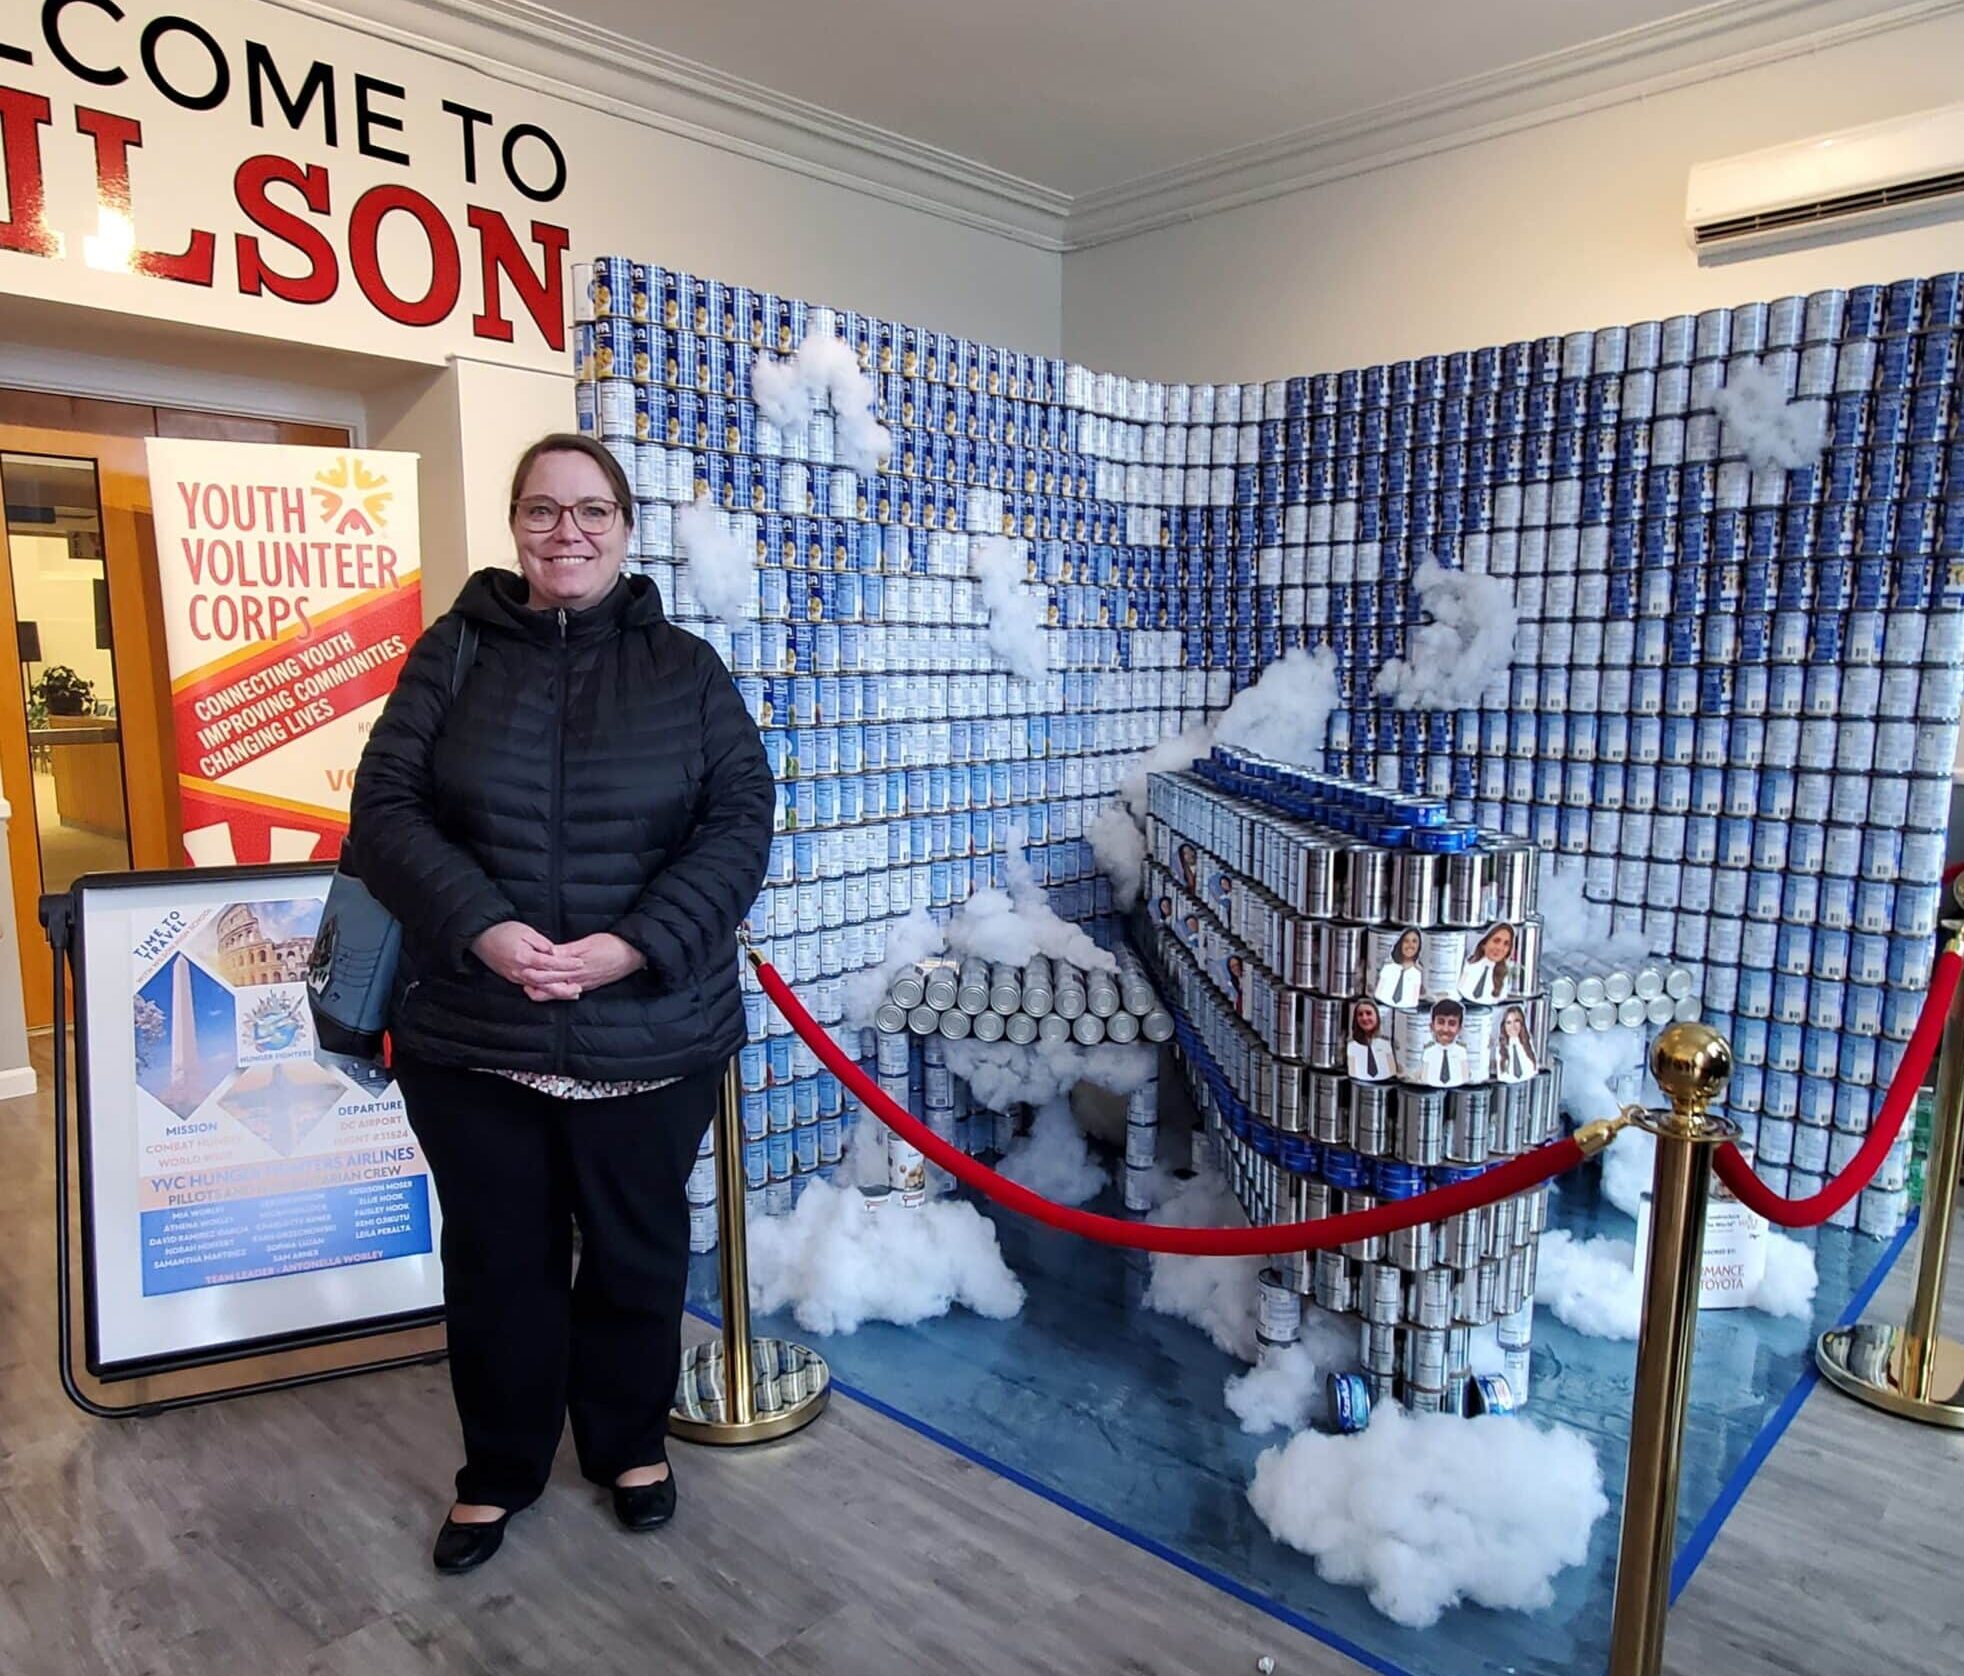 UGI Utilities employee stands in front of airplane sculpture made out of canned food.